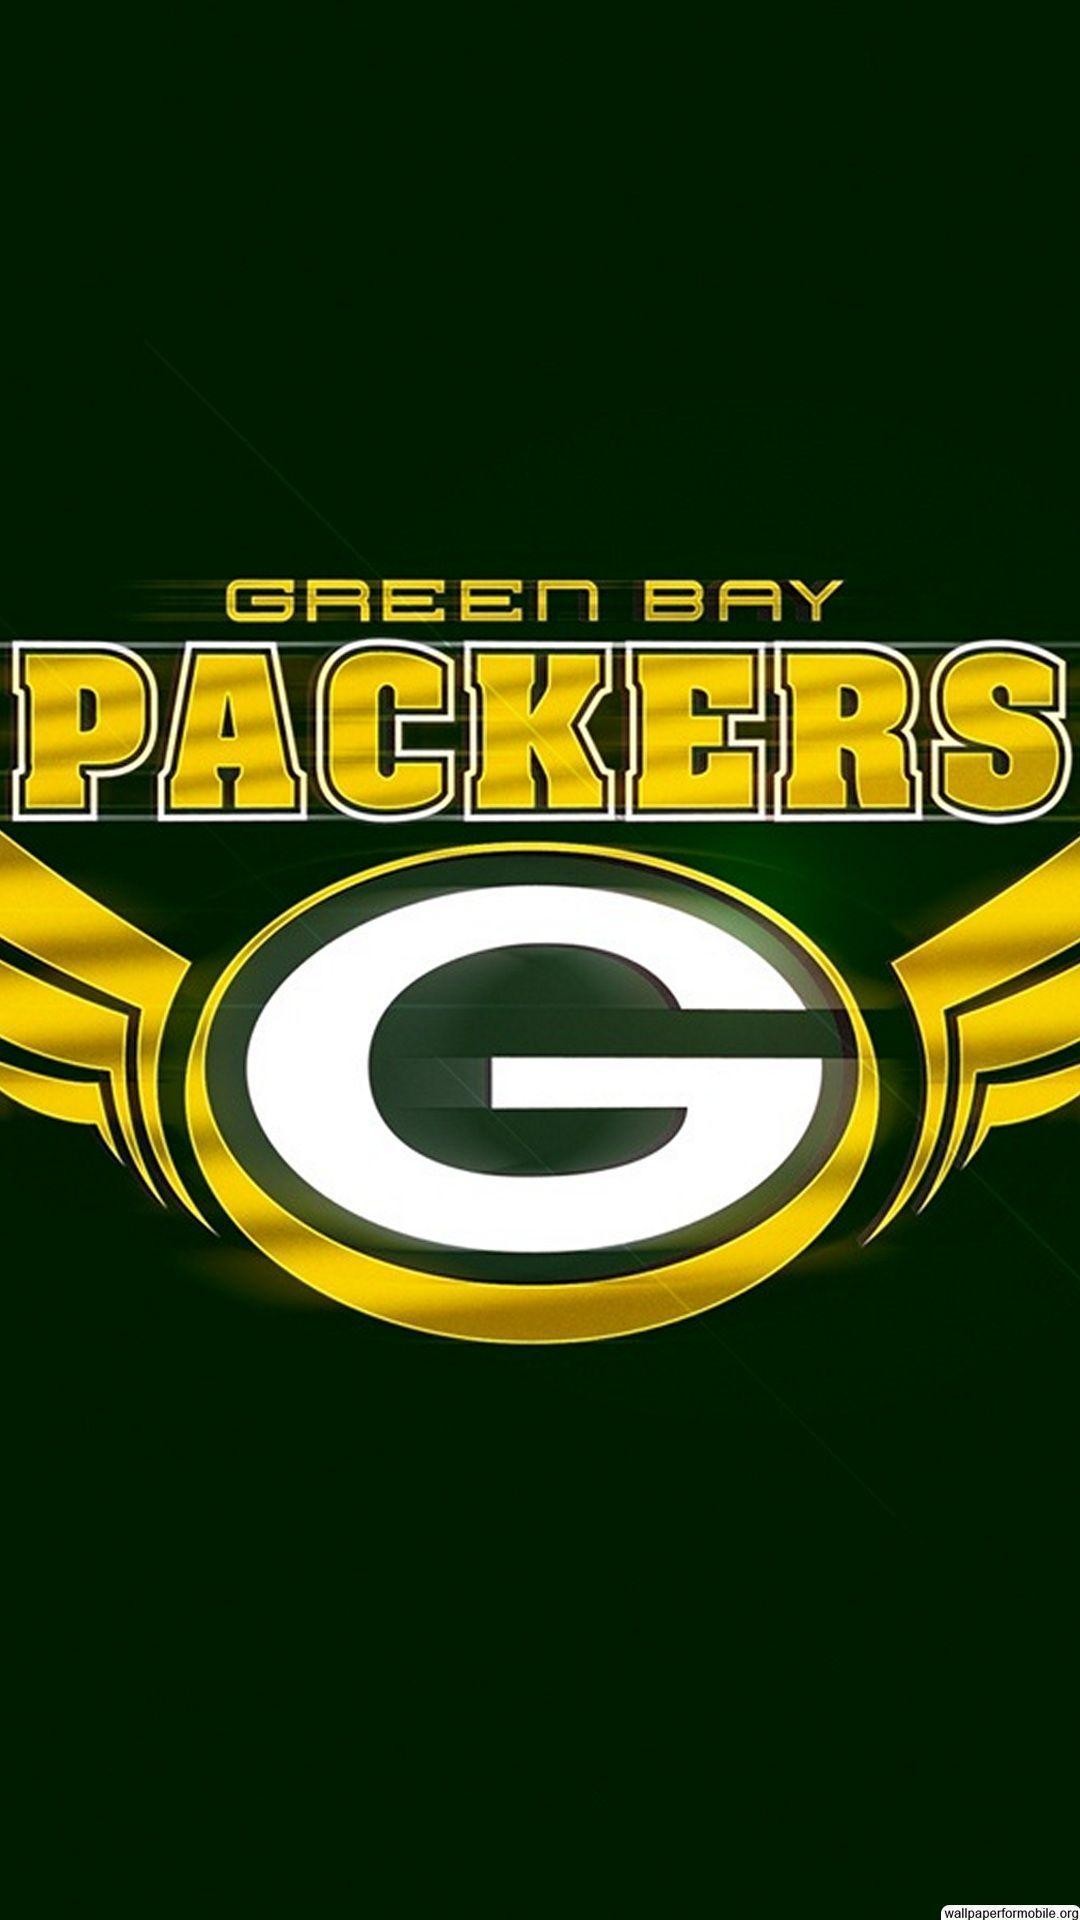 1080x1920 Wallpaper Of Green Bay Packers | Wallpaper for Mobile